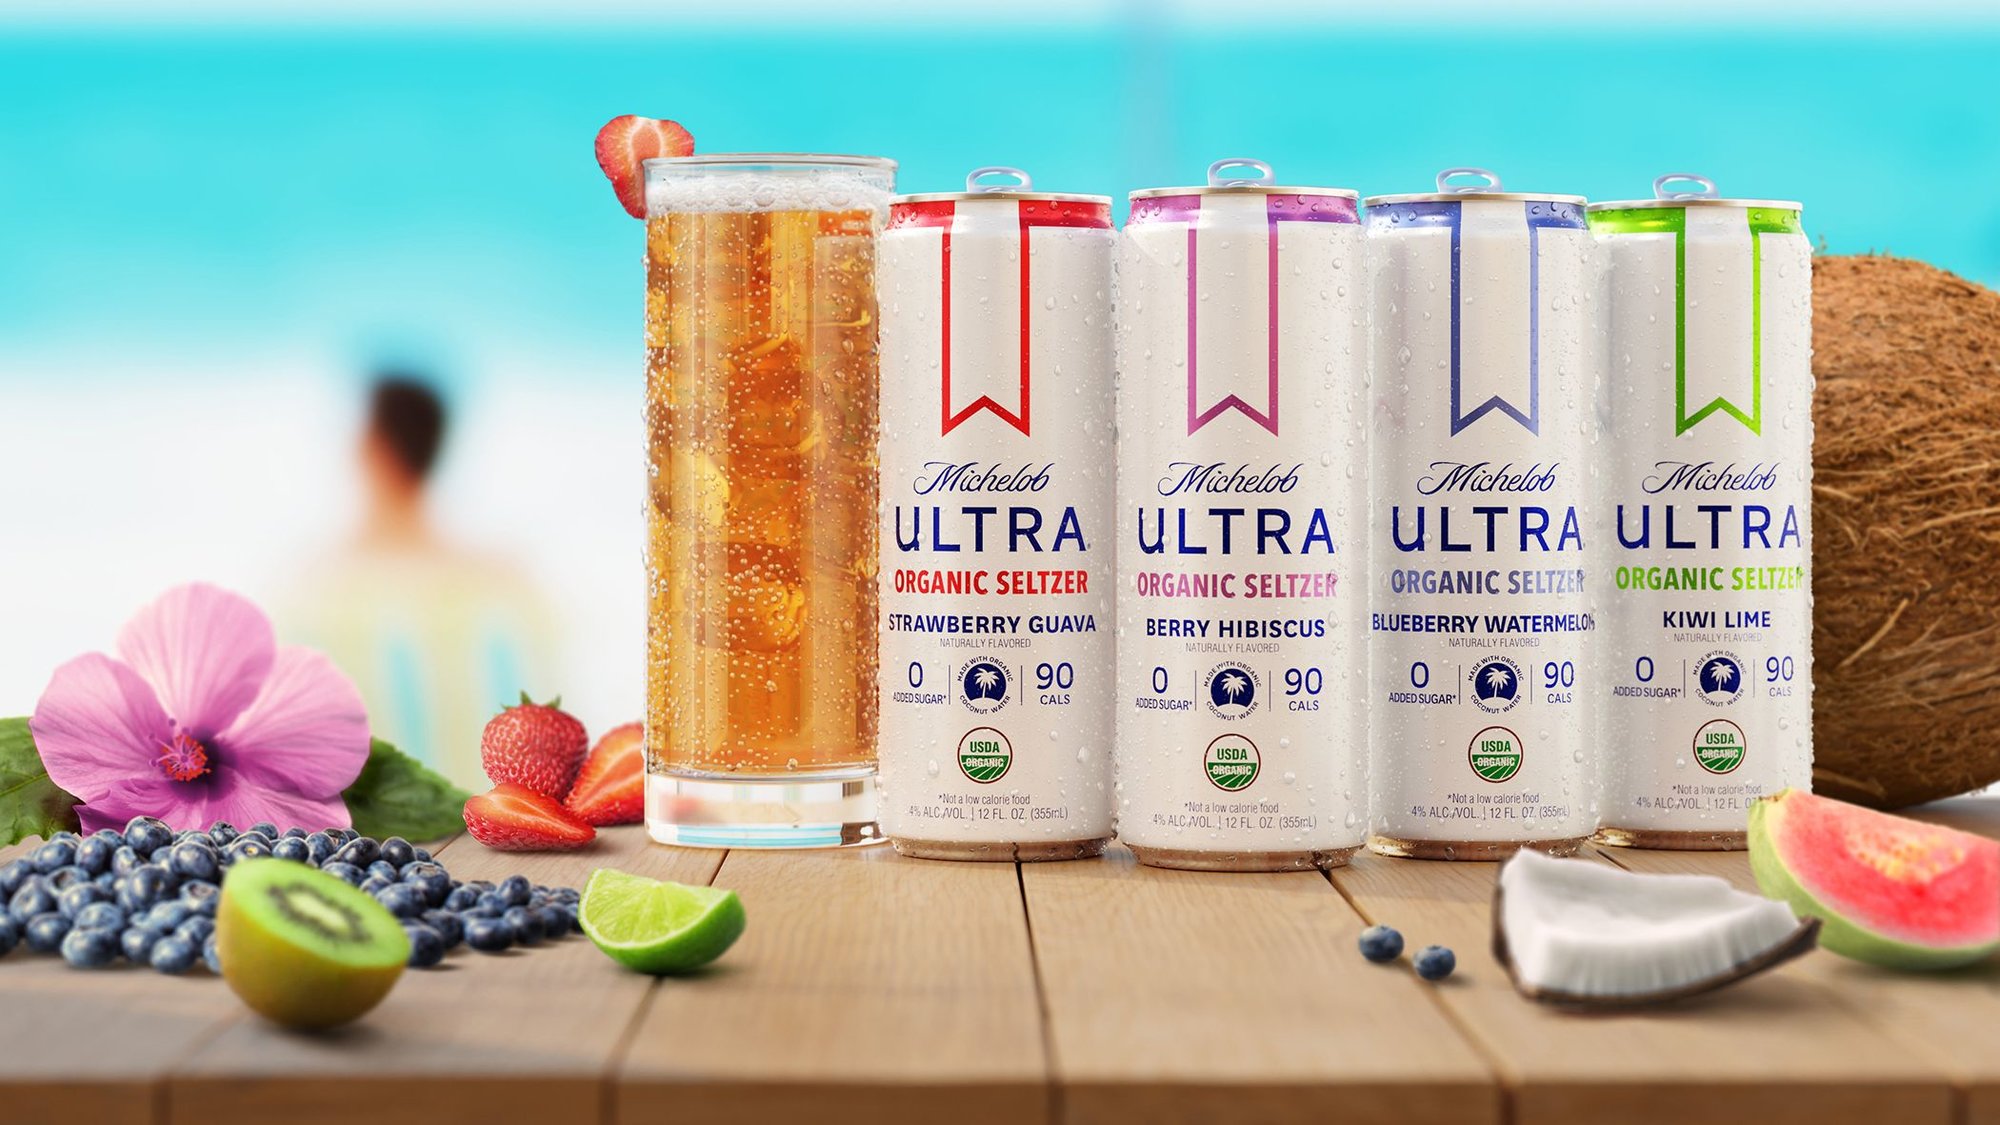 This is the main background for the Michelob Ultra Organic Seltzer Spicy Pineapple